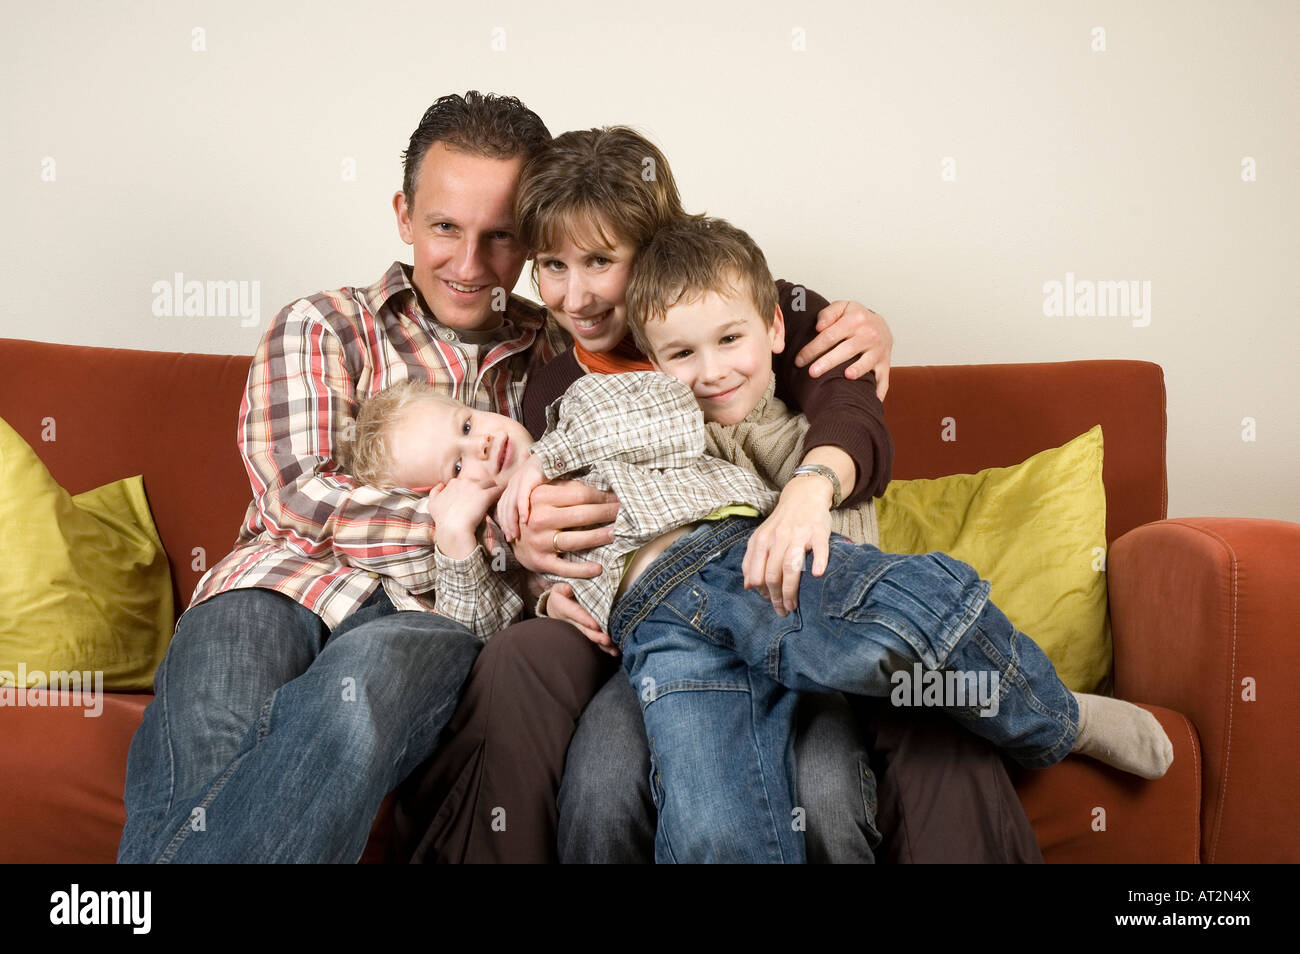 Nice family picture sitting together on a couch Stock Photo